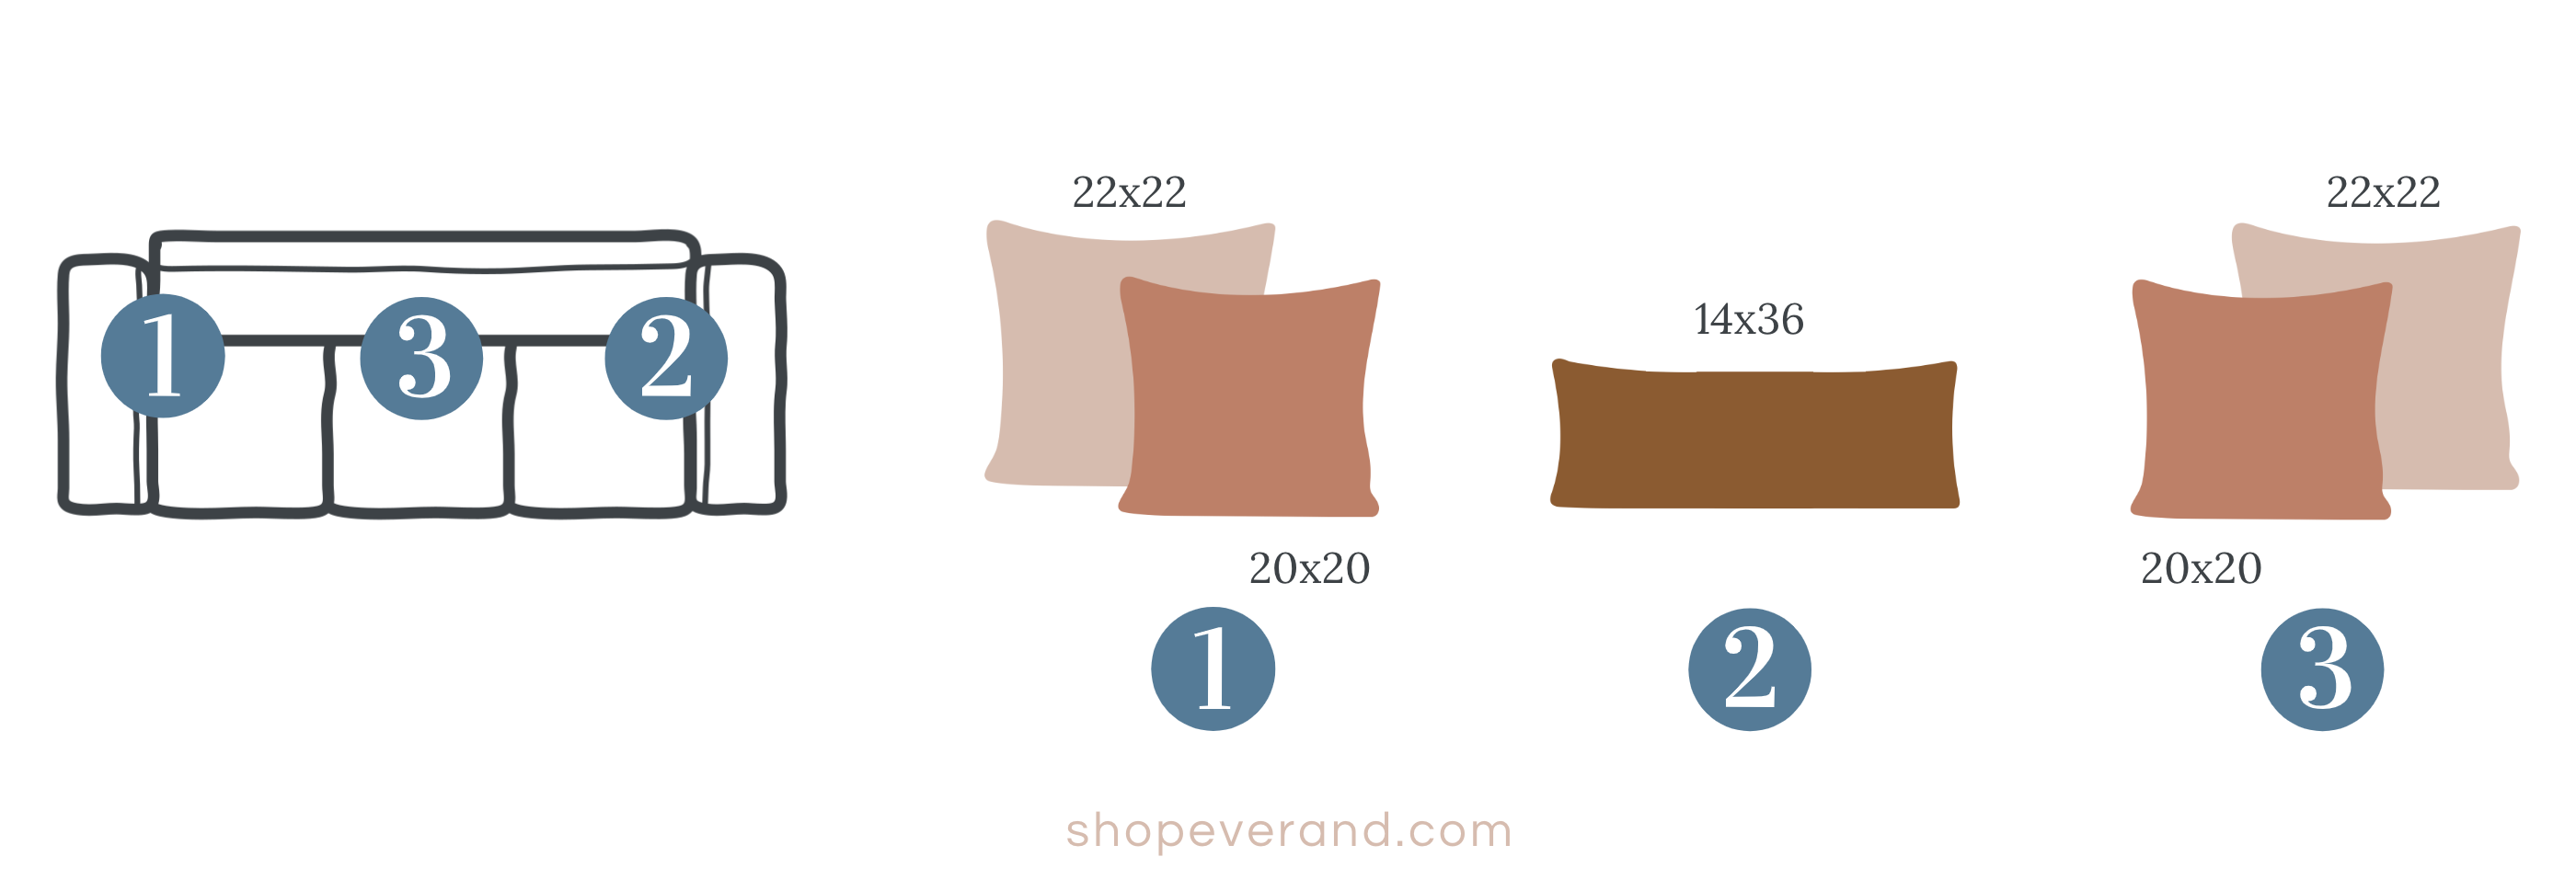 Everand throw pillow combinations for large sofas